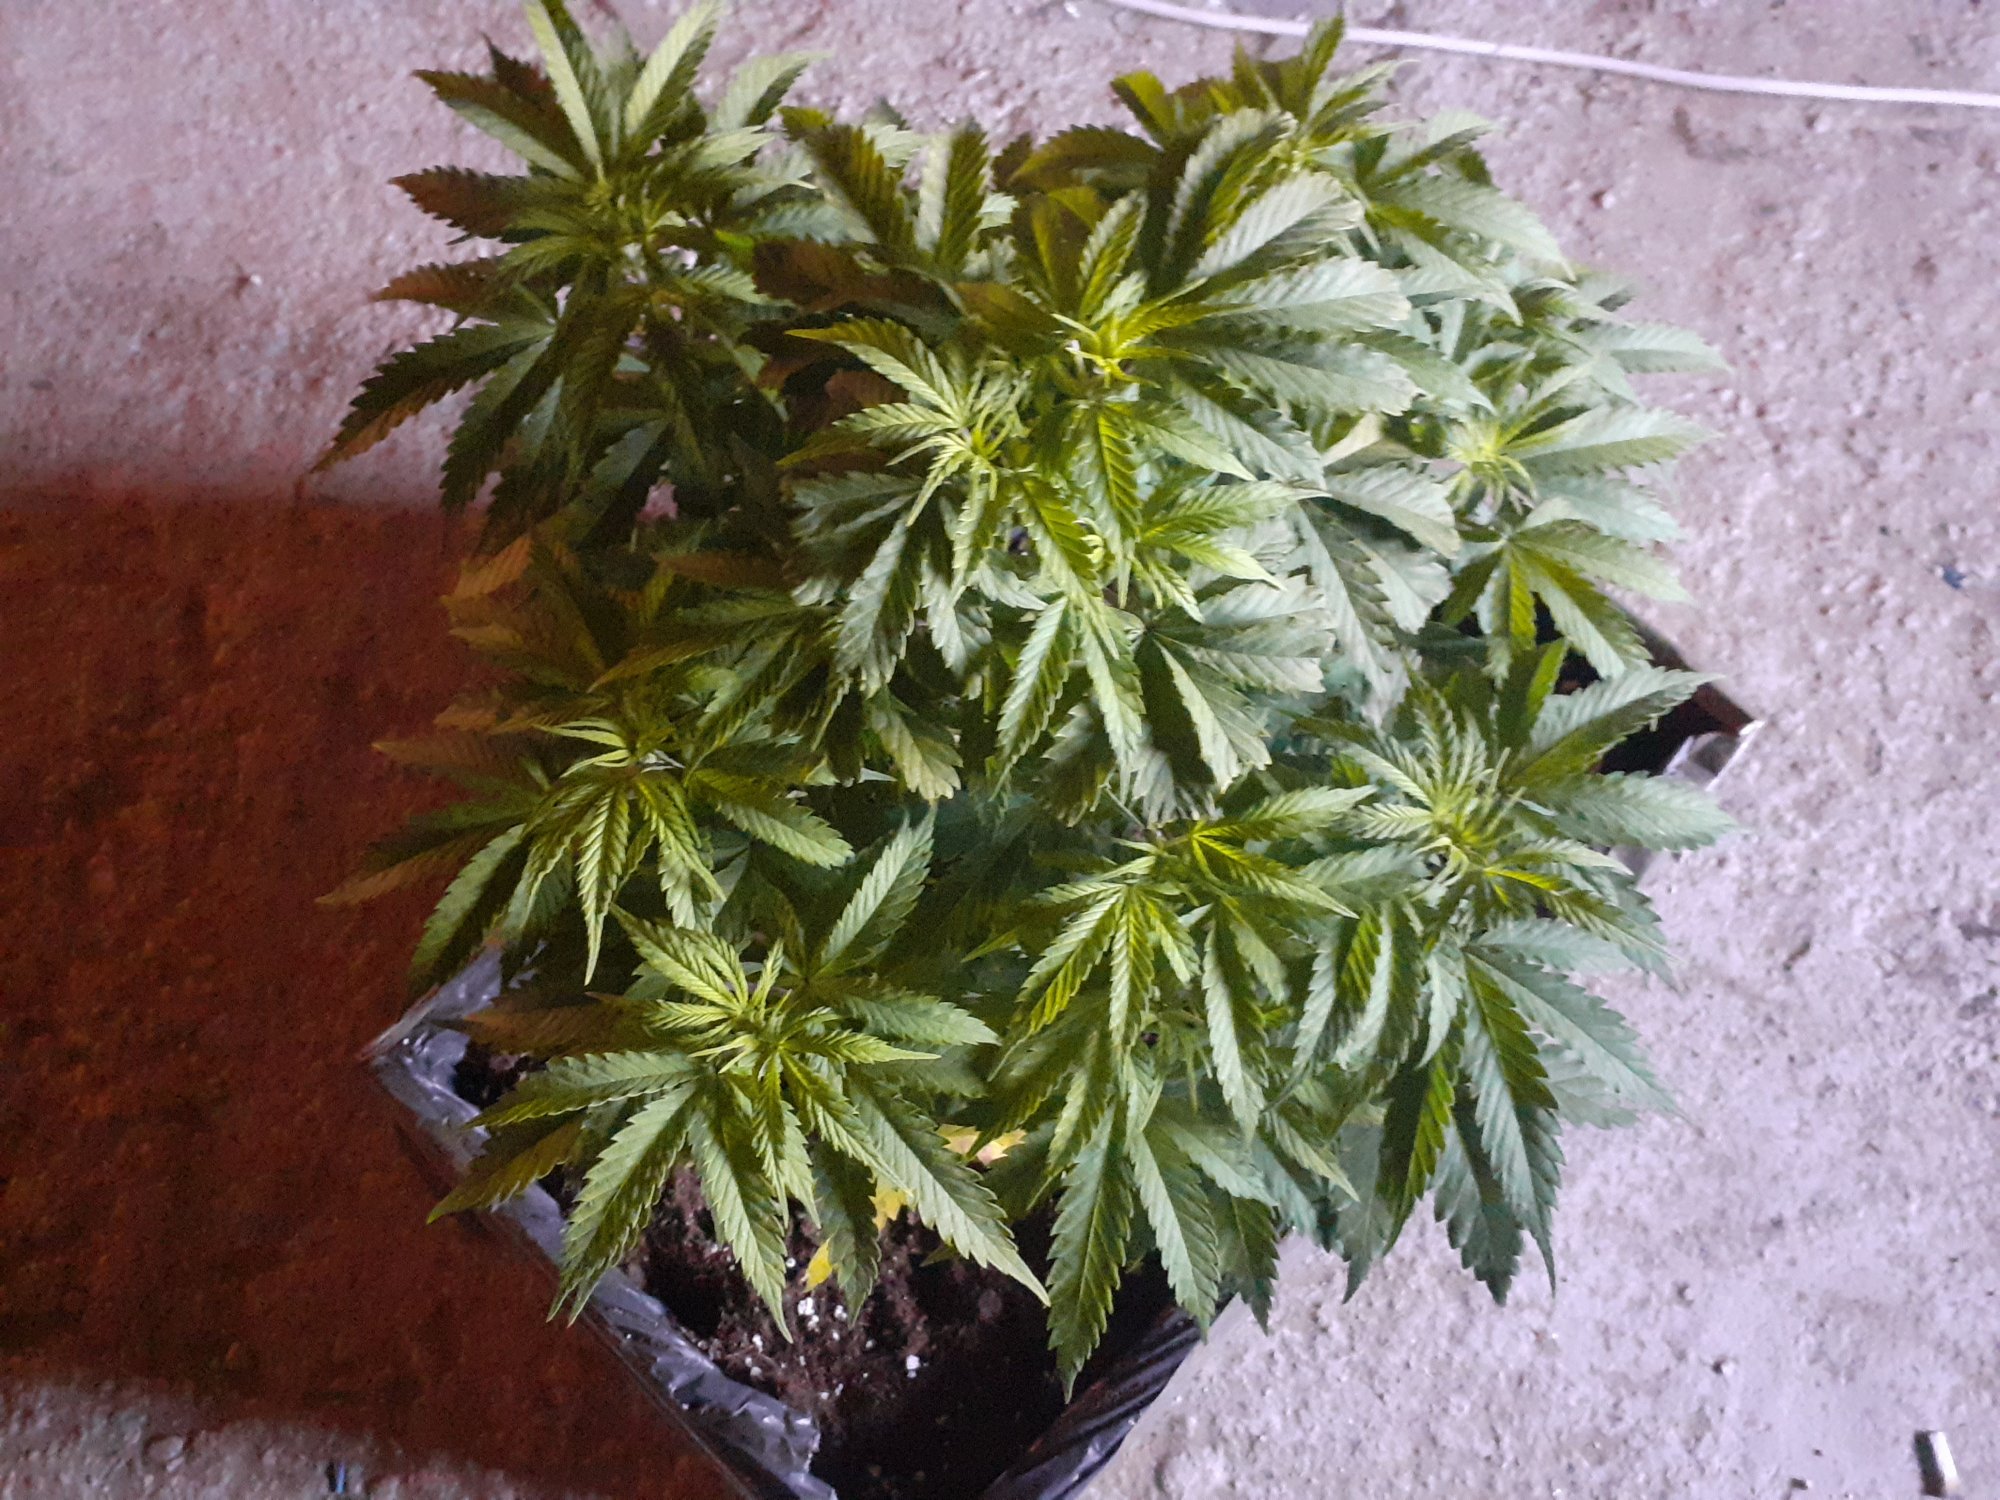 Help what deficiency is this 8